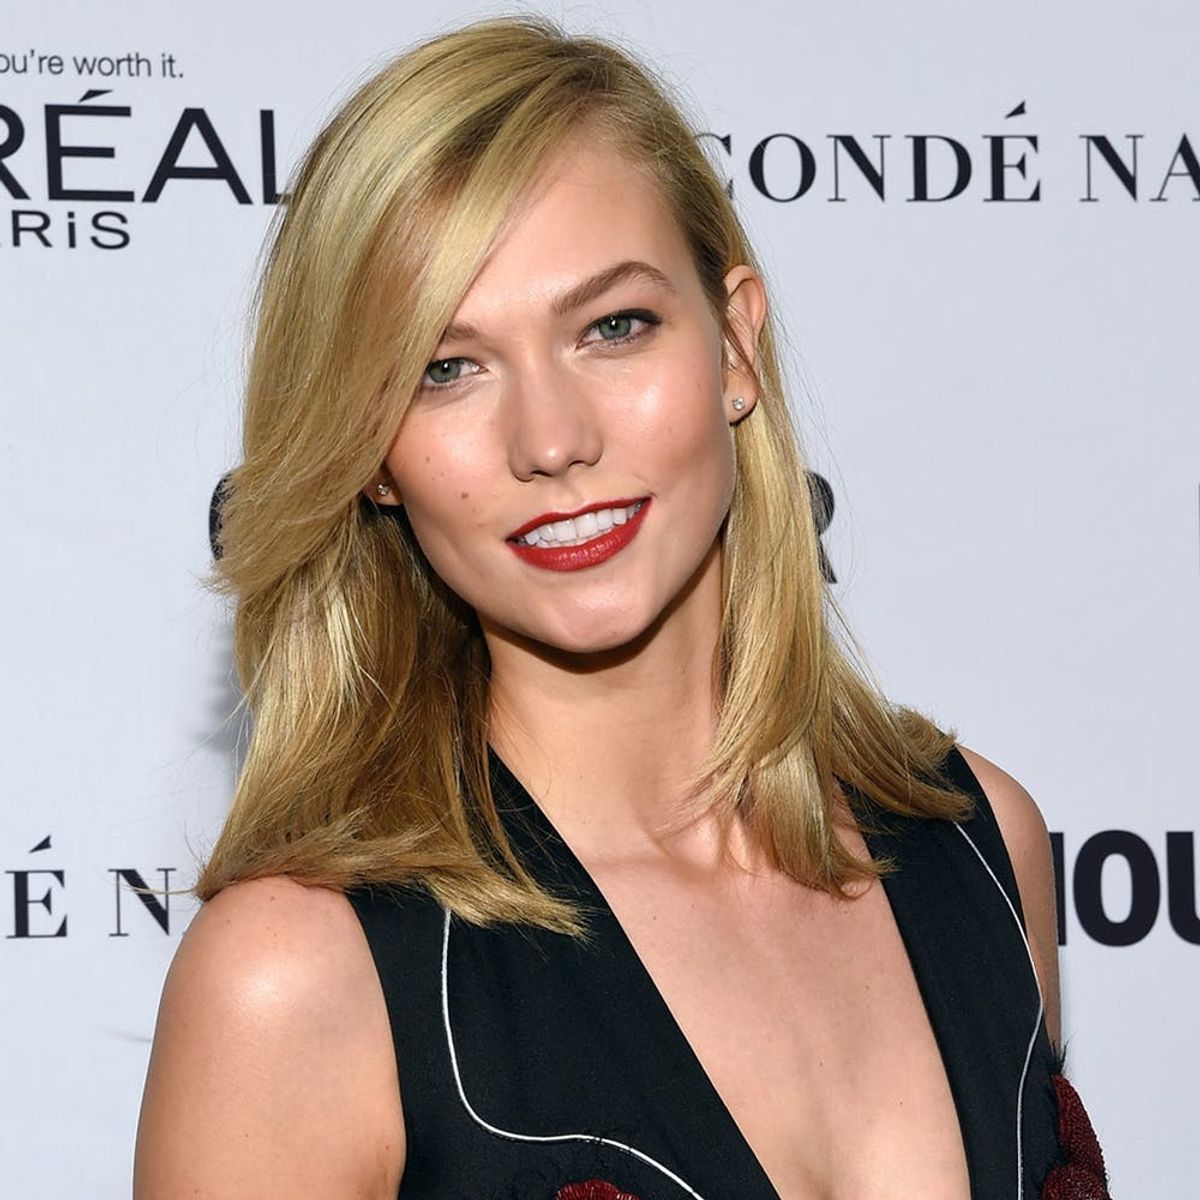 Karlie Kloss Just Launched a Scholarship You Need to Know About